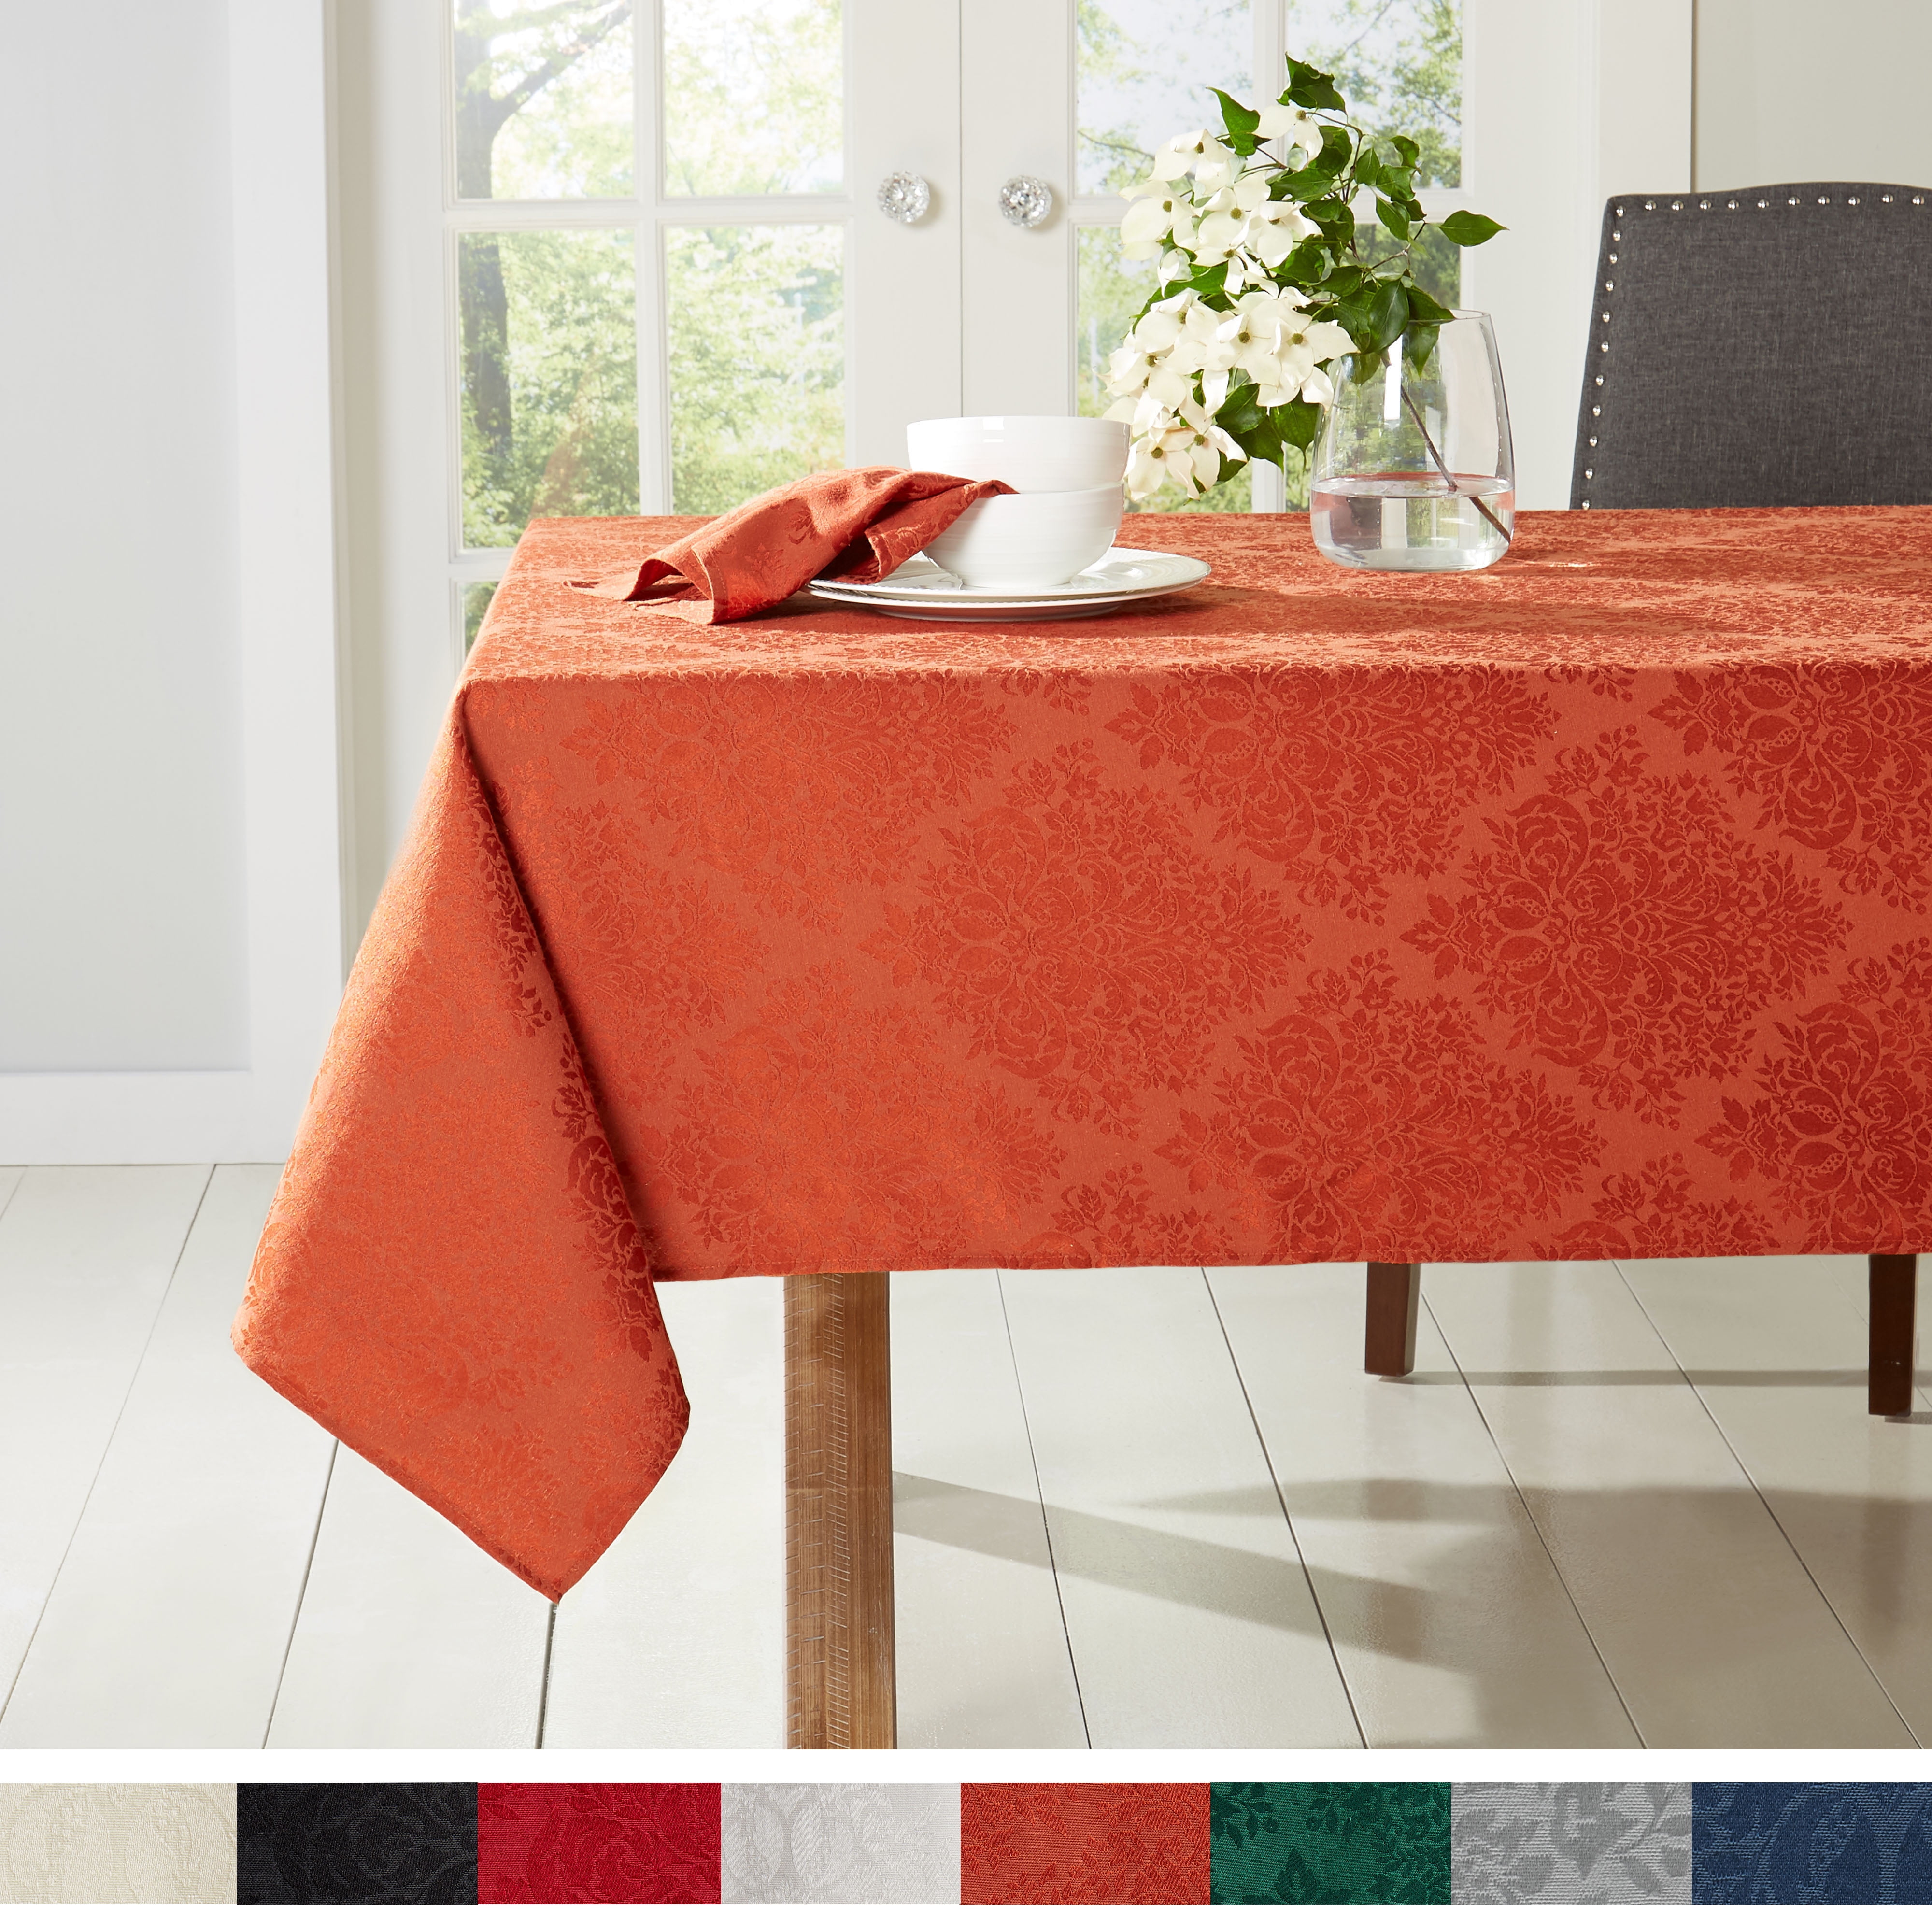 Regal Tartan Kitchen and Table Linens